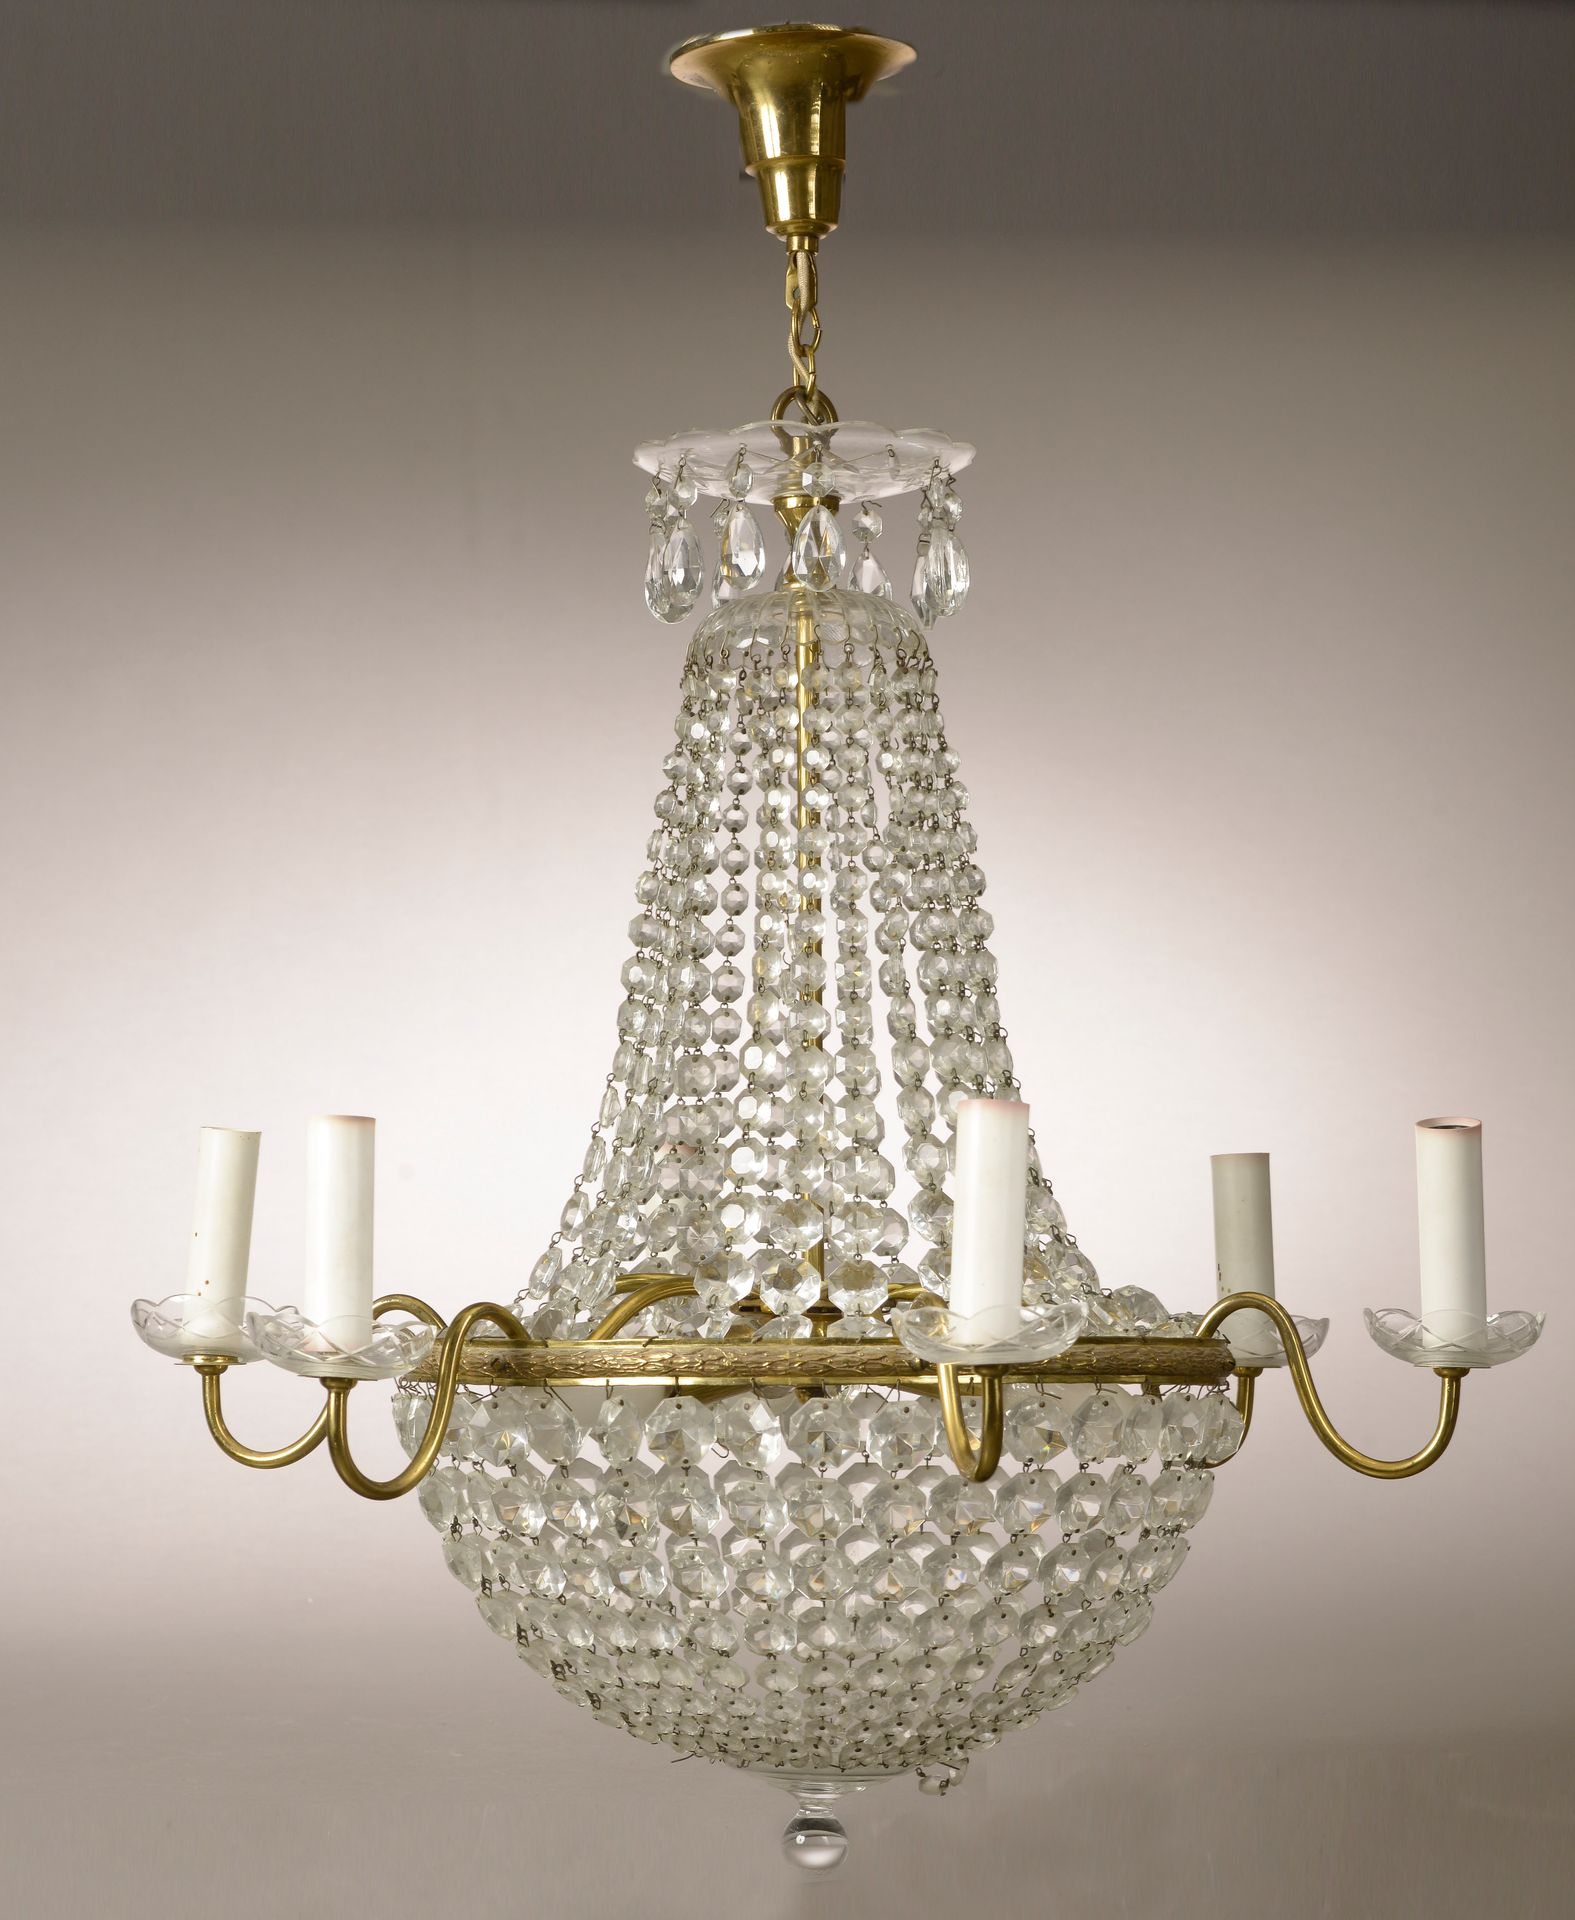 Null Brass corbeille chandelier with cut glass pendants and six arms of light (a&hellip;